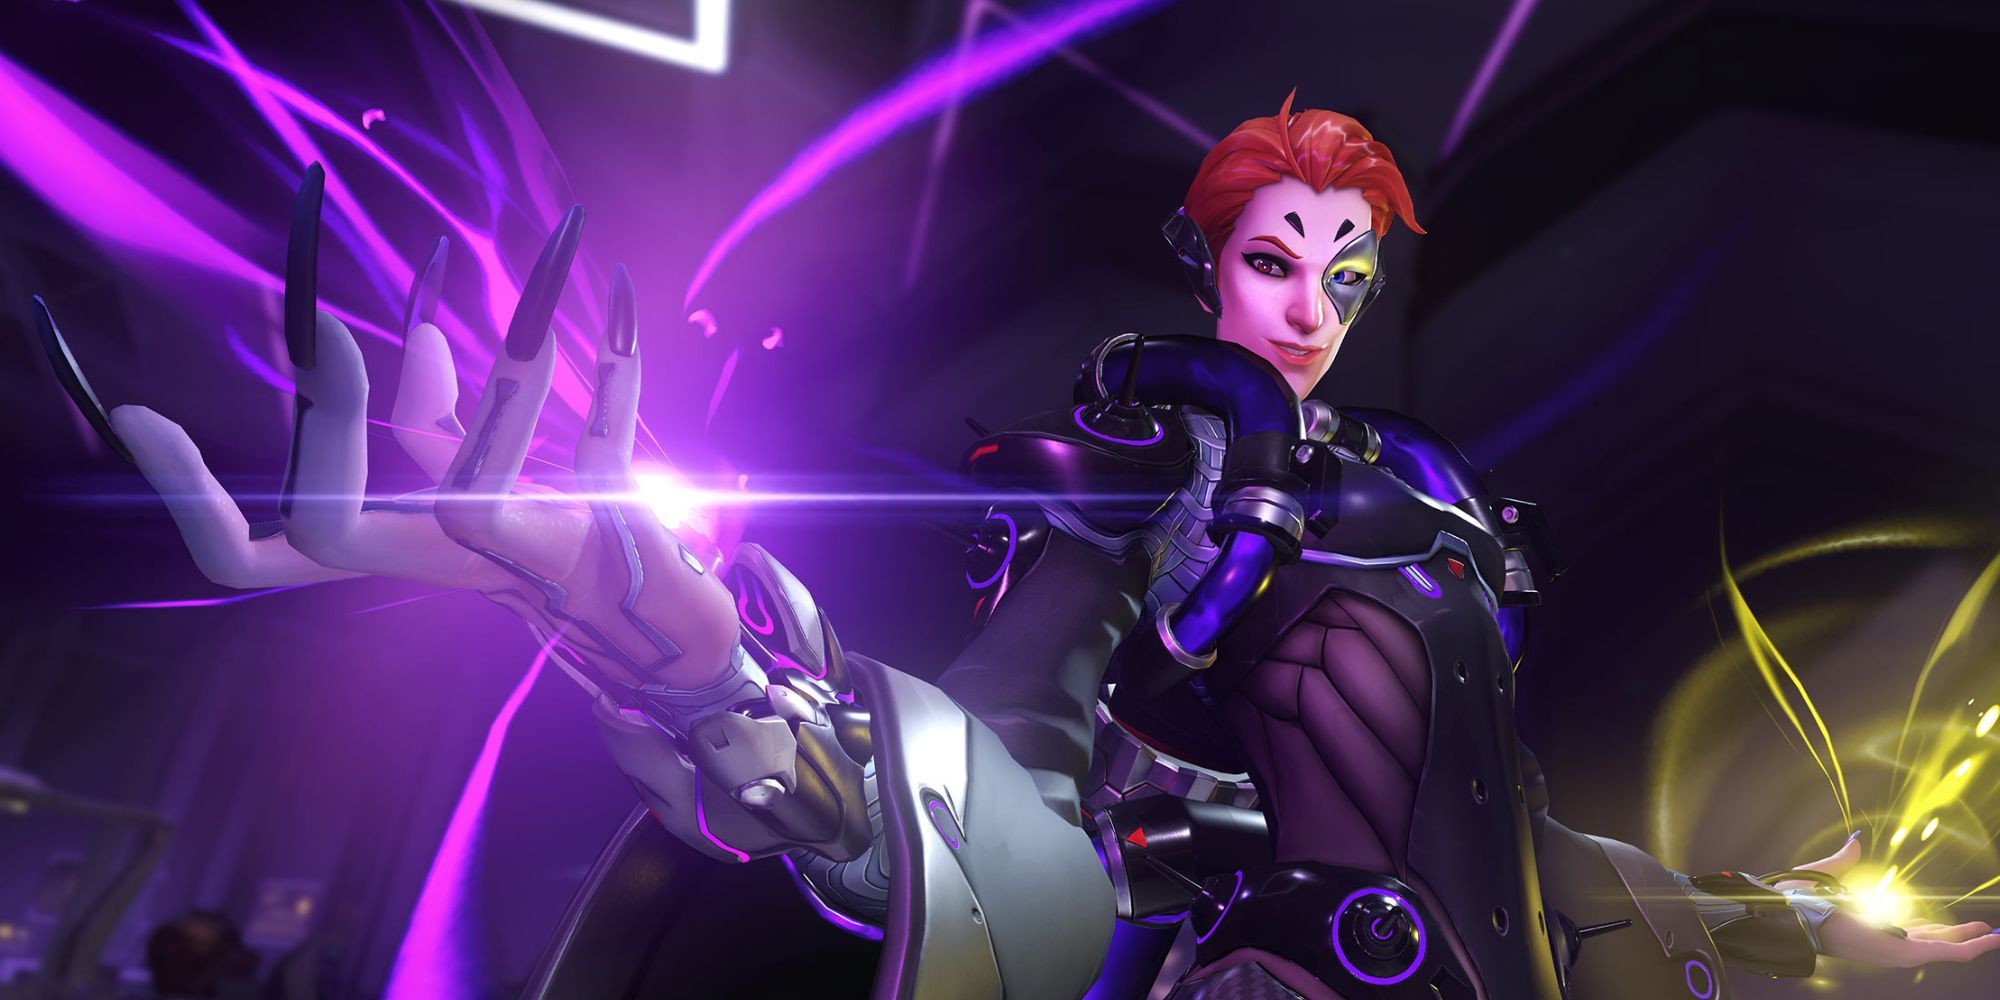 Moira in Overwatch 2, showing off her damage and healing magic.